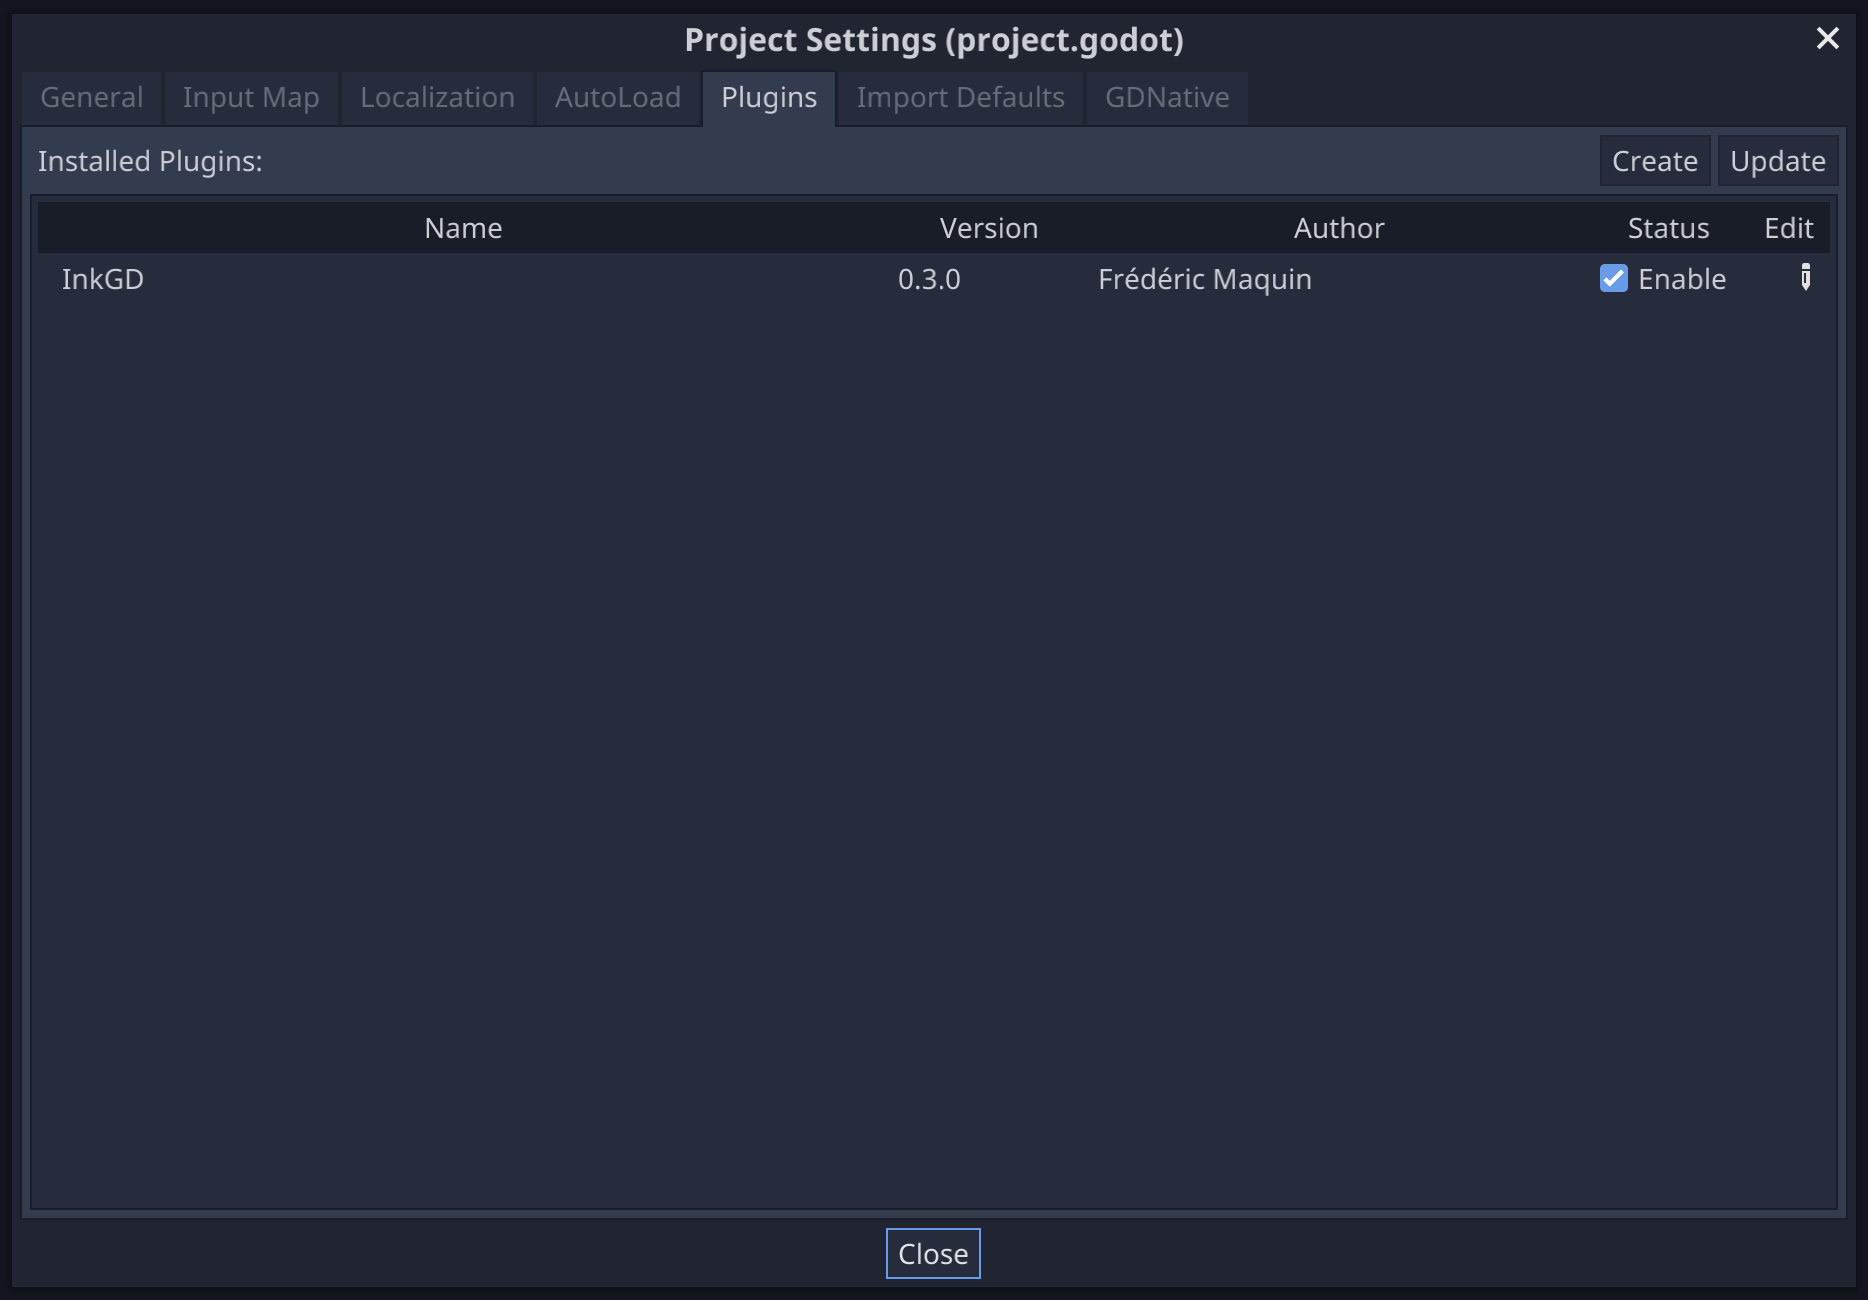 inkgd's entry in the "Plugins" tab of the project settings.